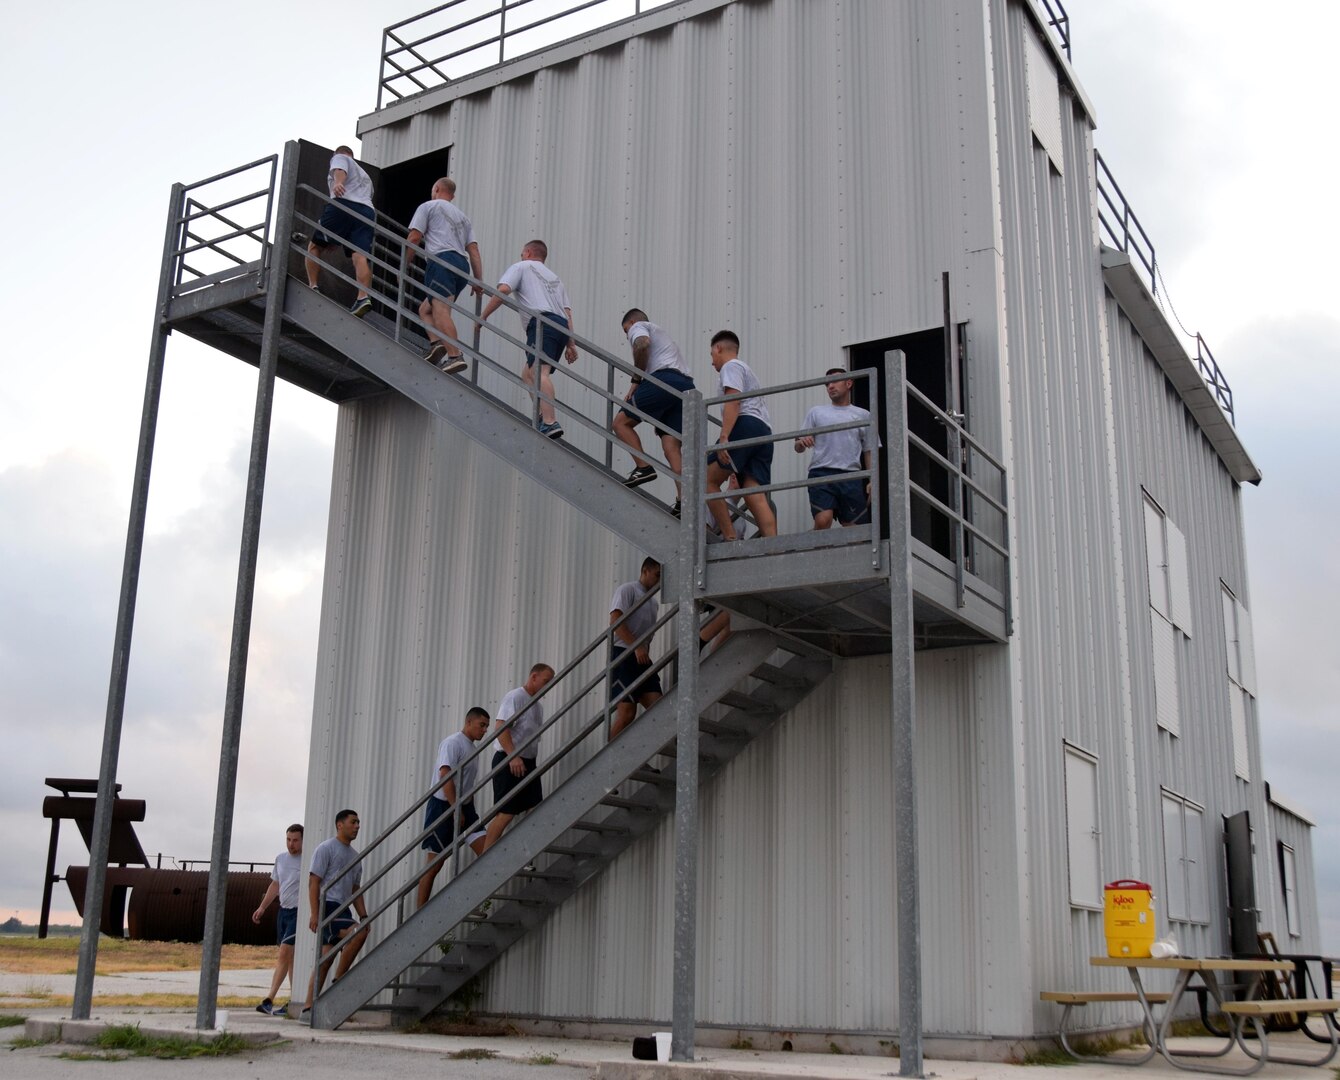 The 433rd Civil Engineer Squadron firefighters climb stairs of the fire training building to honor the first responders lost during the Sept. 11, 2001 attacks on the World Trade Center during a 9/11 Memorial Stair Climb Sept. 8, 2019 at Joint Base San Antonio-Lackland. The firefighters climbed stairs 55 times to equal the 110 floors of World Trade Center twin tower buildings.